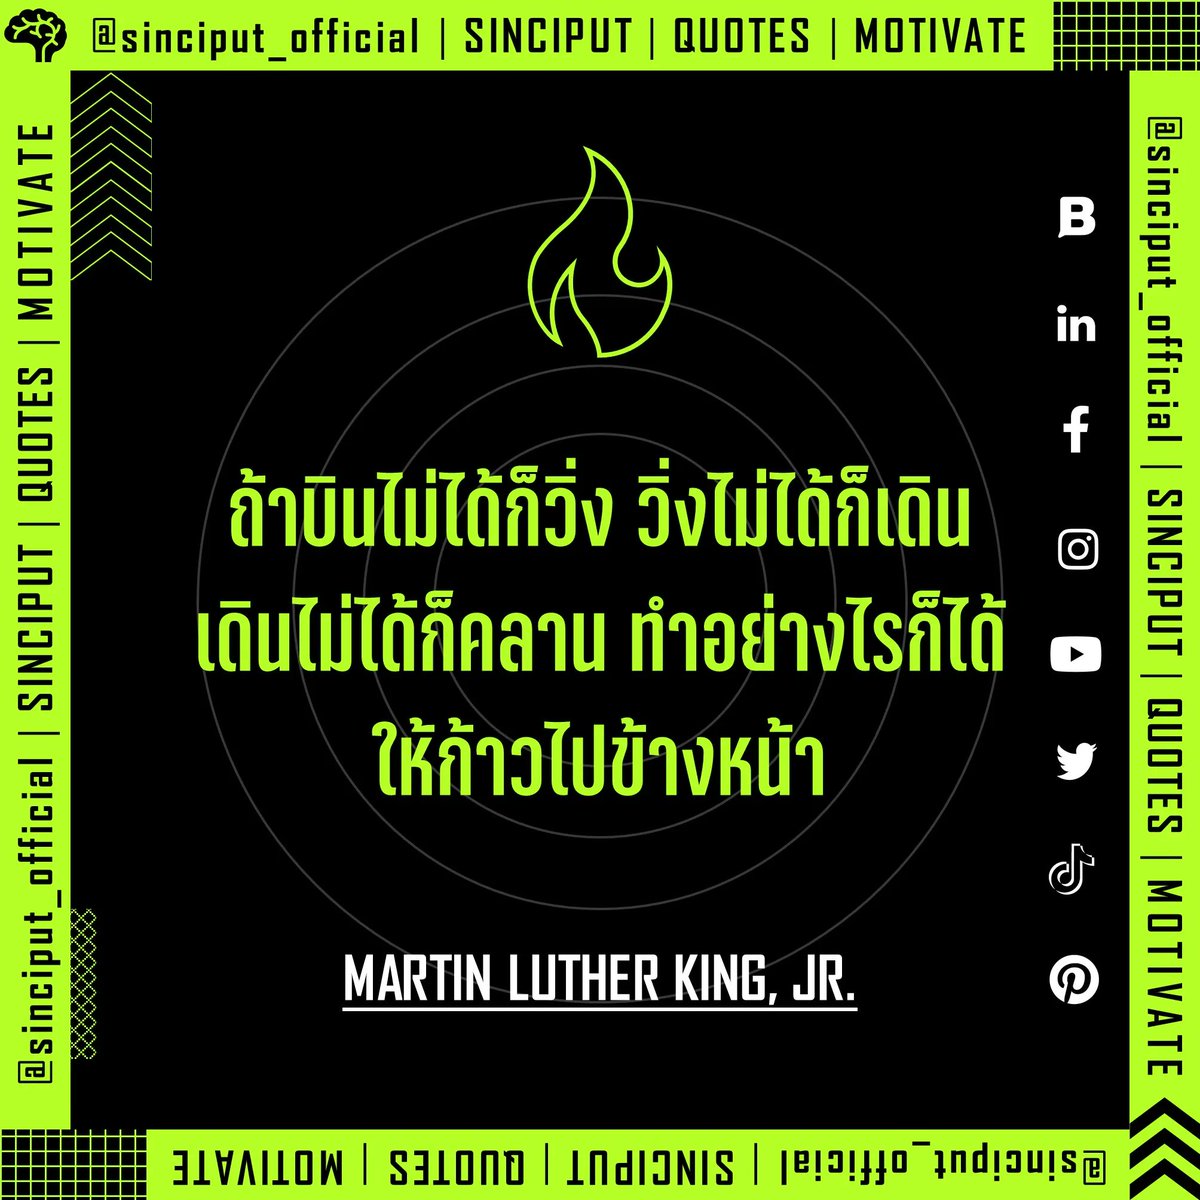 If you can't fly then run, if you can't run then walk, if you can't walk then crawl, but whatever you do you have to keep moving forward. | MOTIV8 | QUOTES

#sinciput #quote #motivation #mindset #courage #enthusiasm #inspiration #leadership #positive #martinlutherkingjr #คำคม